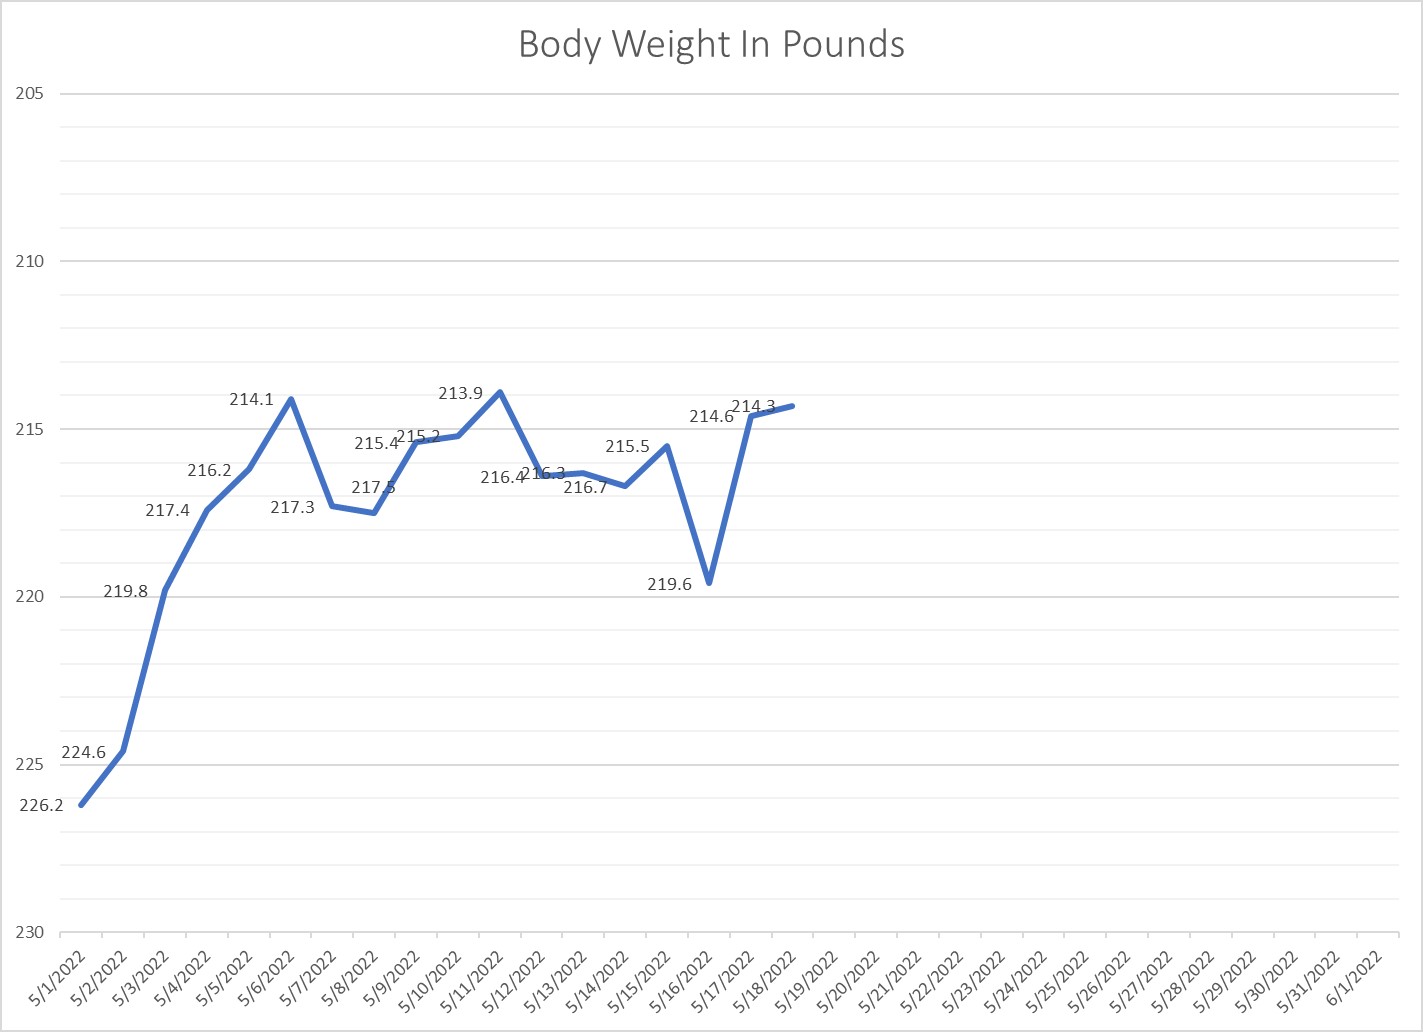 Leos Body Weight in Poounds graph